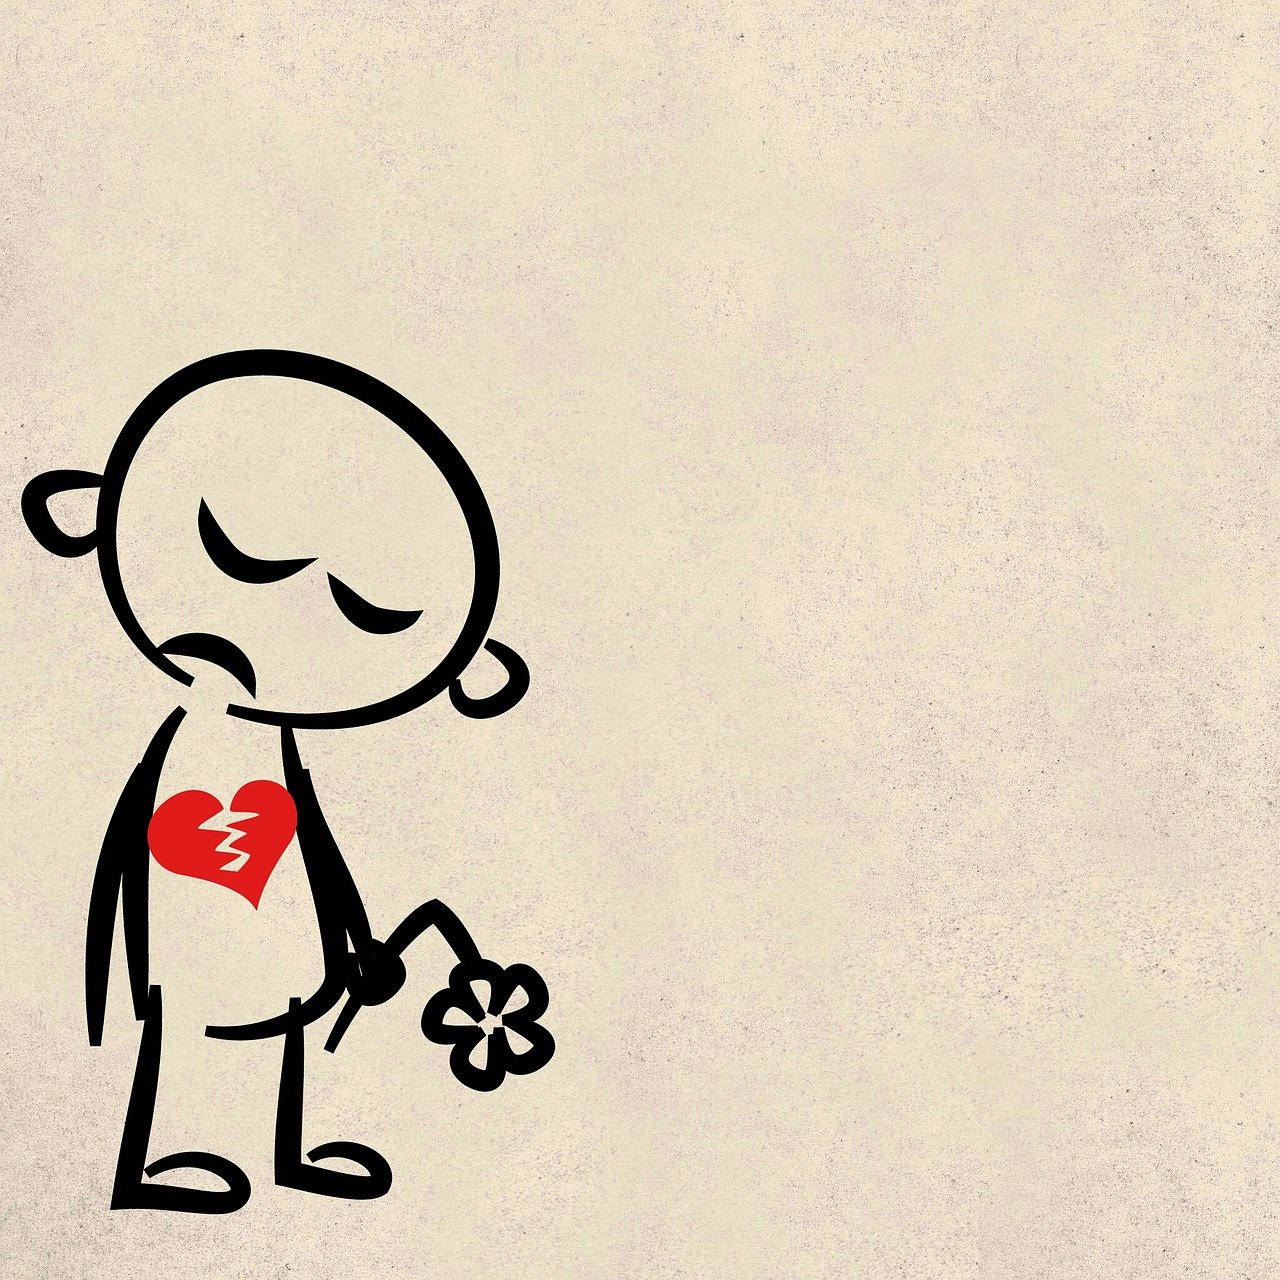 A sad-faced stick figure with a red broken heart holding a broken flower on a gray background.